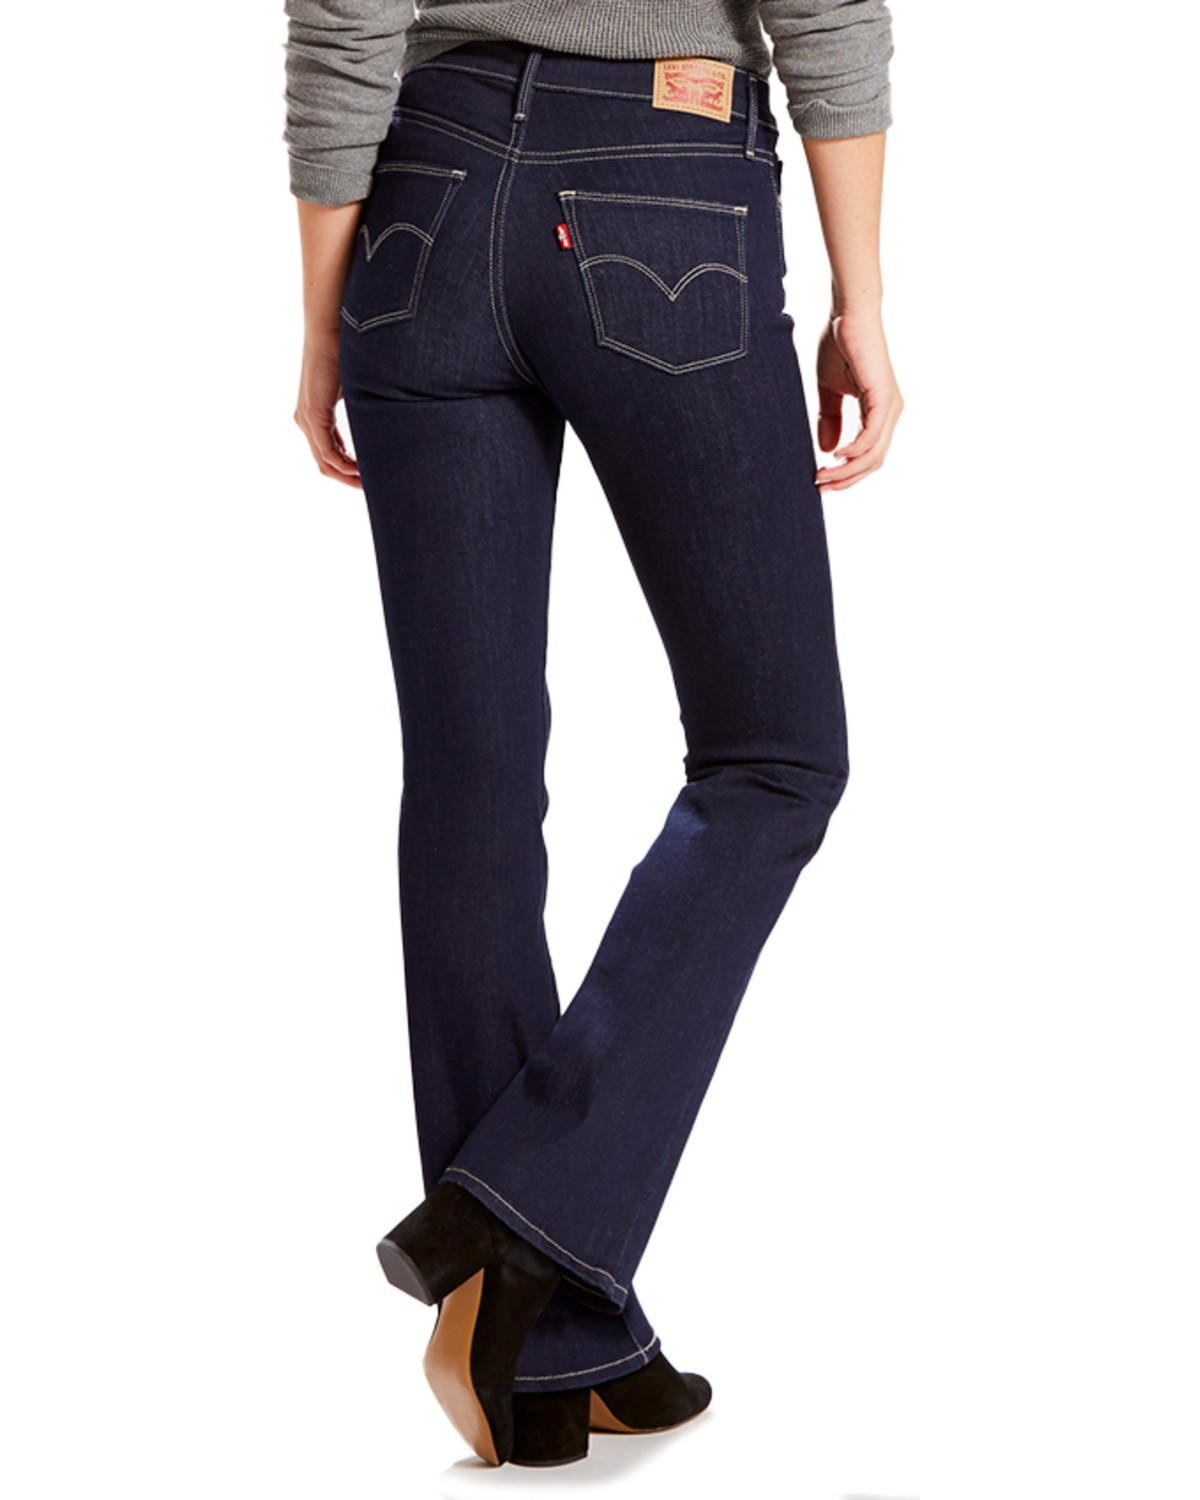 Levi's Women's Slimming Boot Cut Jeans - Country Outfitter